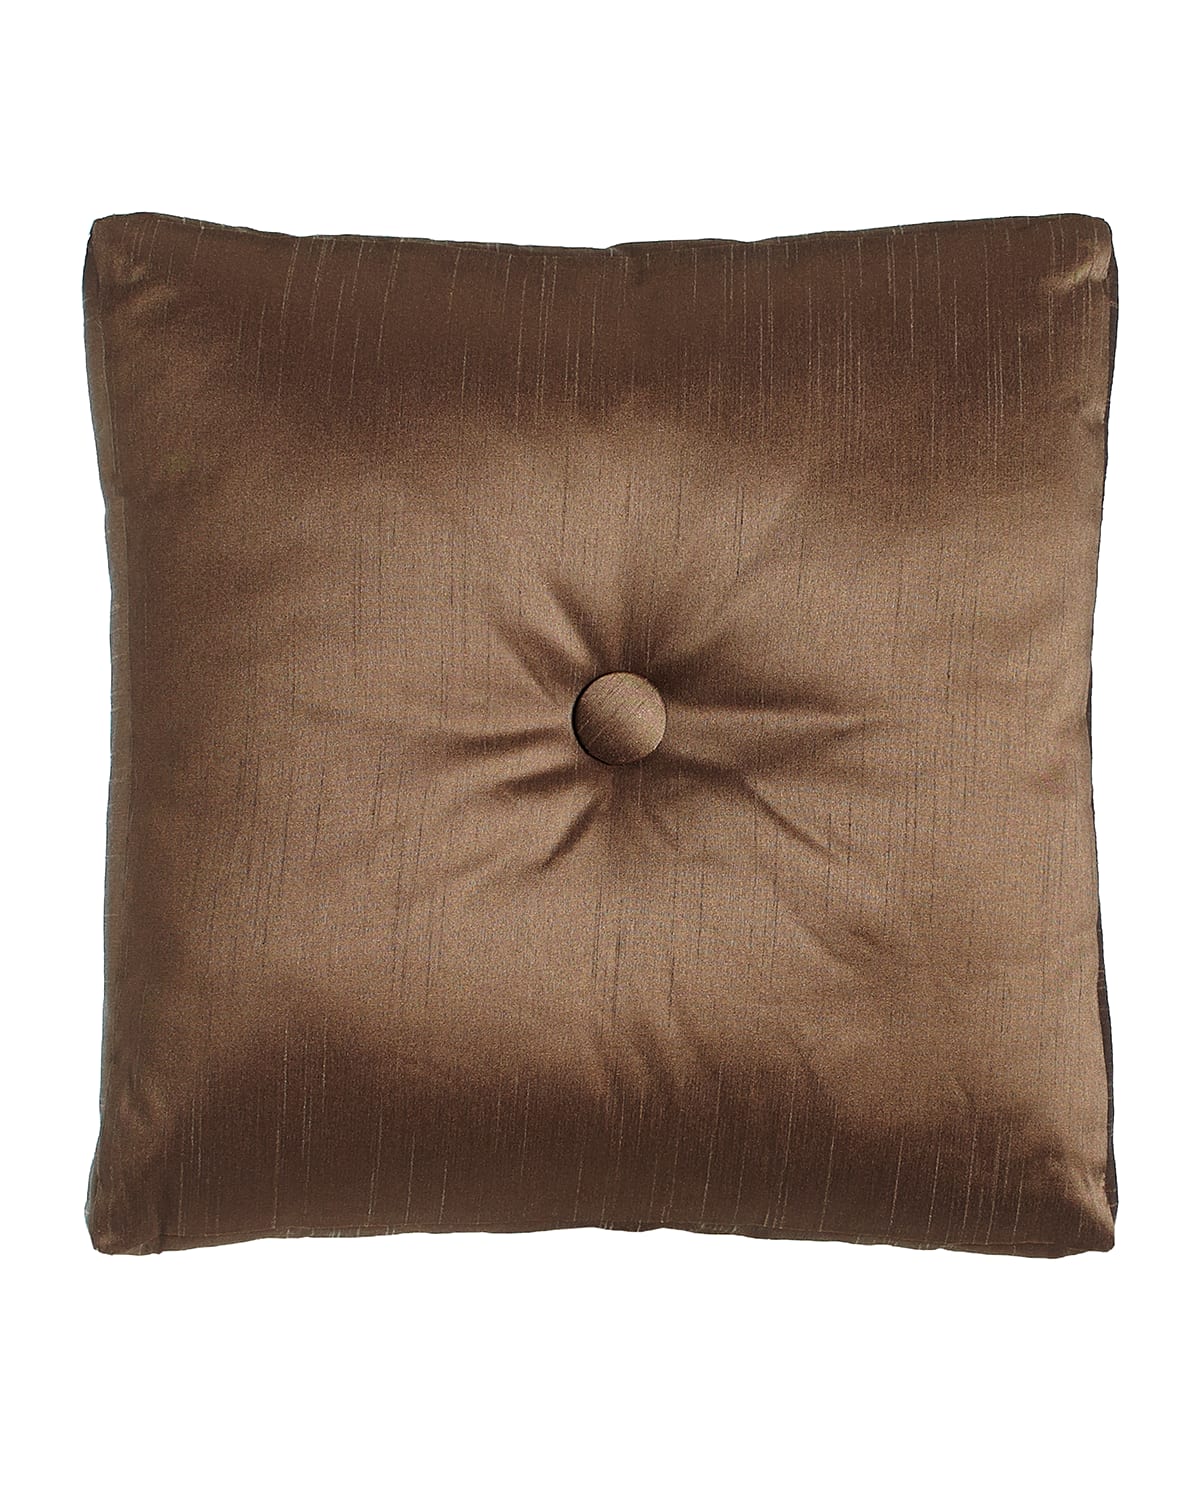 Image Dian Austin Couture Home Le Plaza Solid-Color Box Pillow with Button Center, 20"Sq.